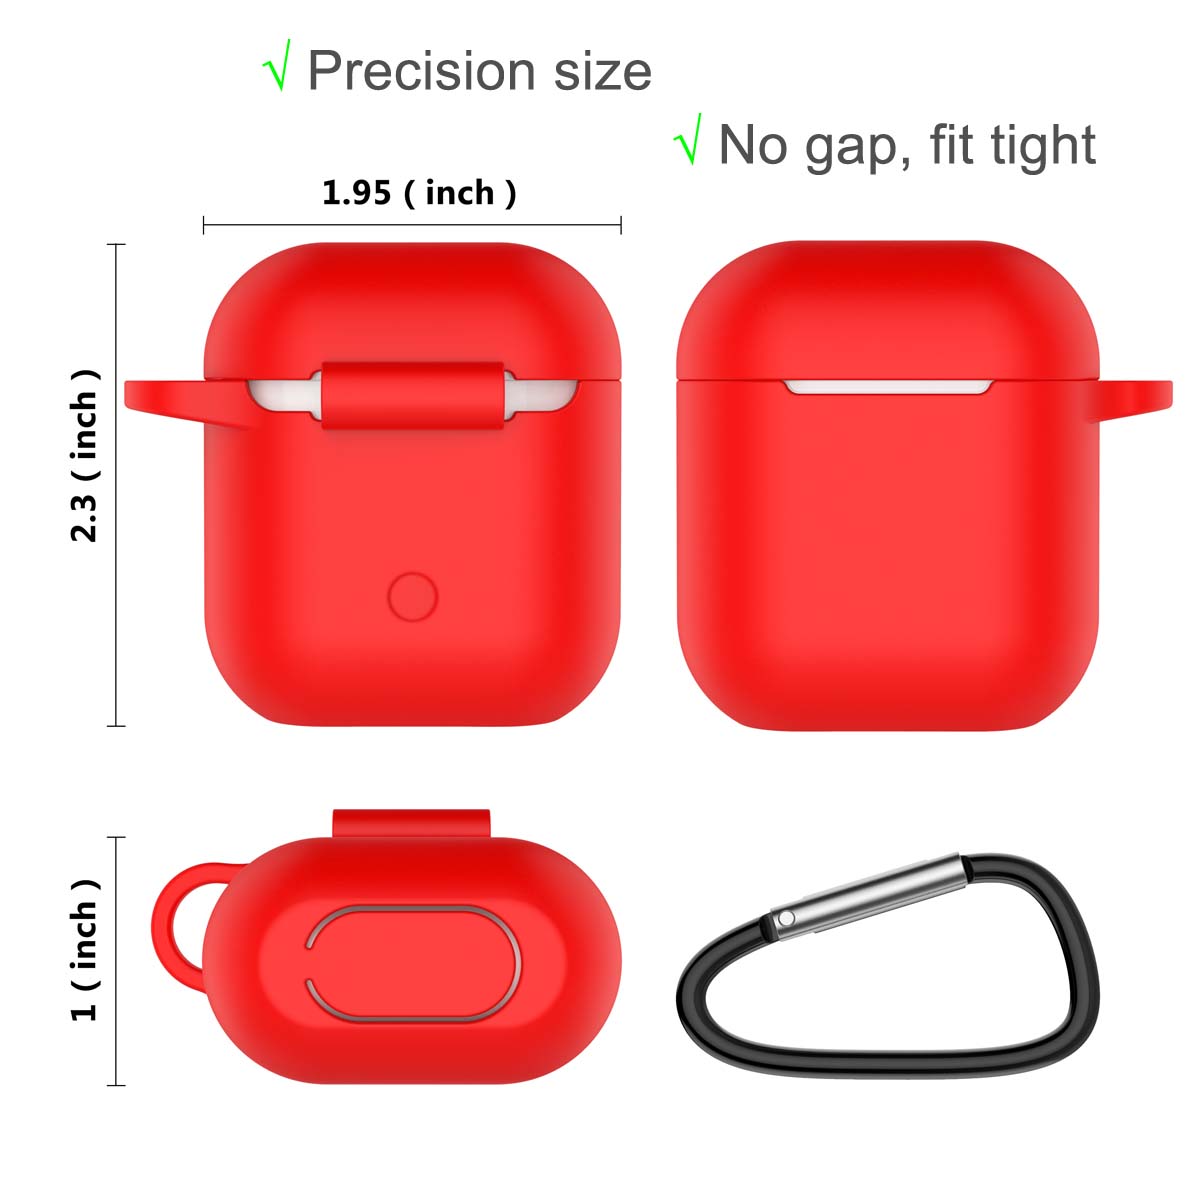 Apple Airpods 2 Skin, For Airpods Charging Case fur Ball for Airpods 2nd, Takfox Scratch-Resistant 360° Protective Portable Liquid Silicone Cover Skin For Airpods 2 Rubber Accessories + Keychain - image 2 of 6